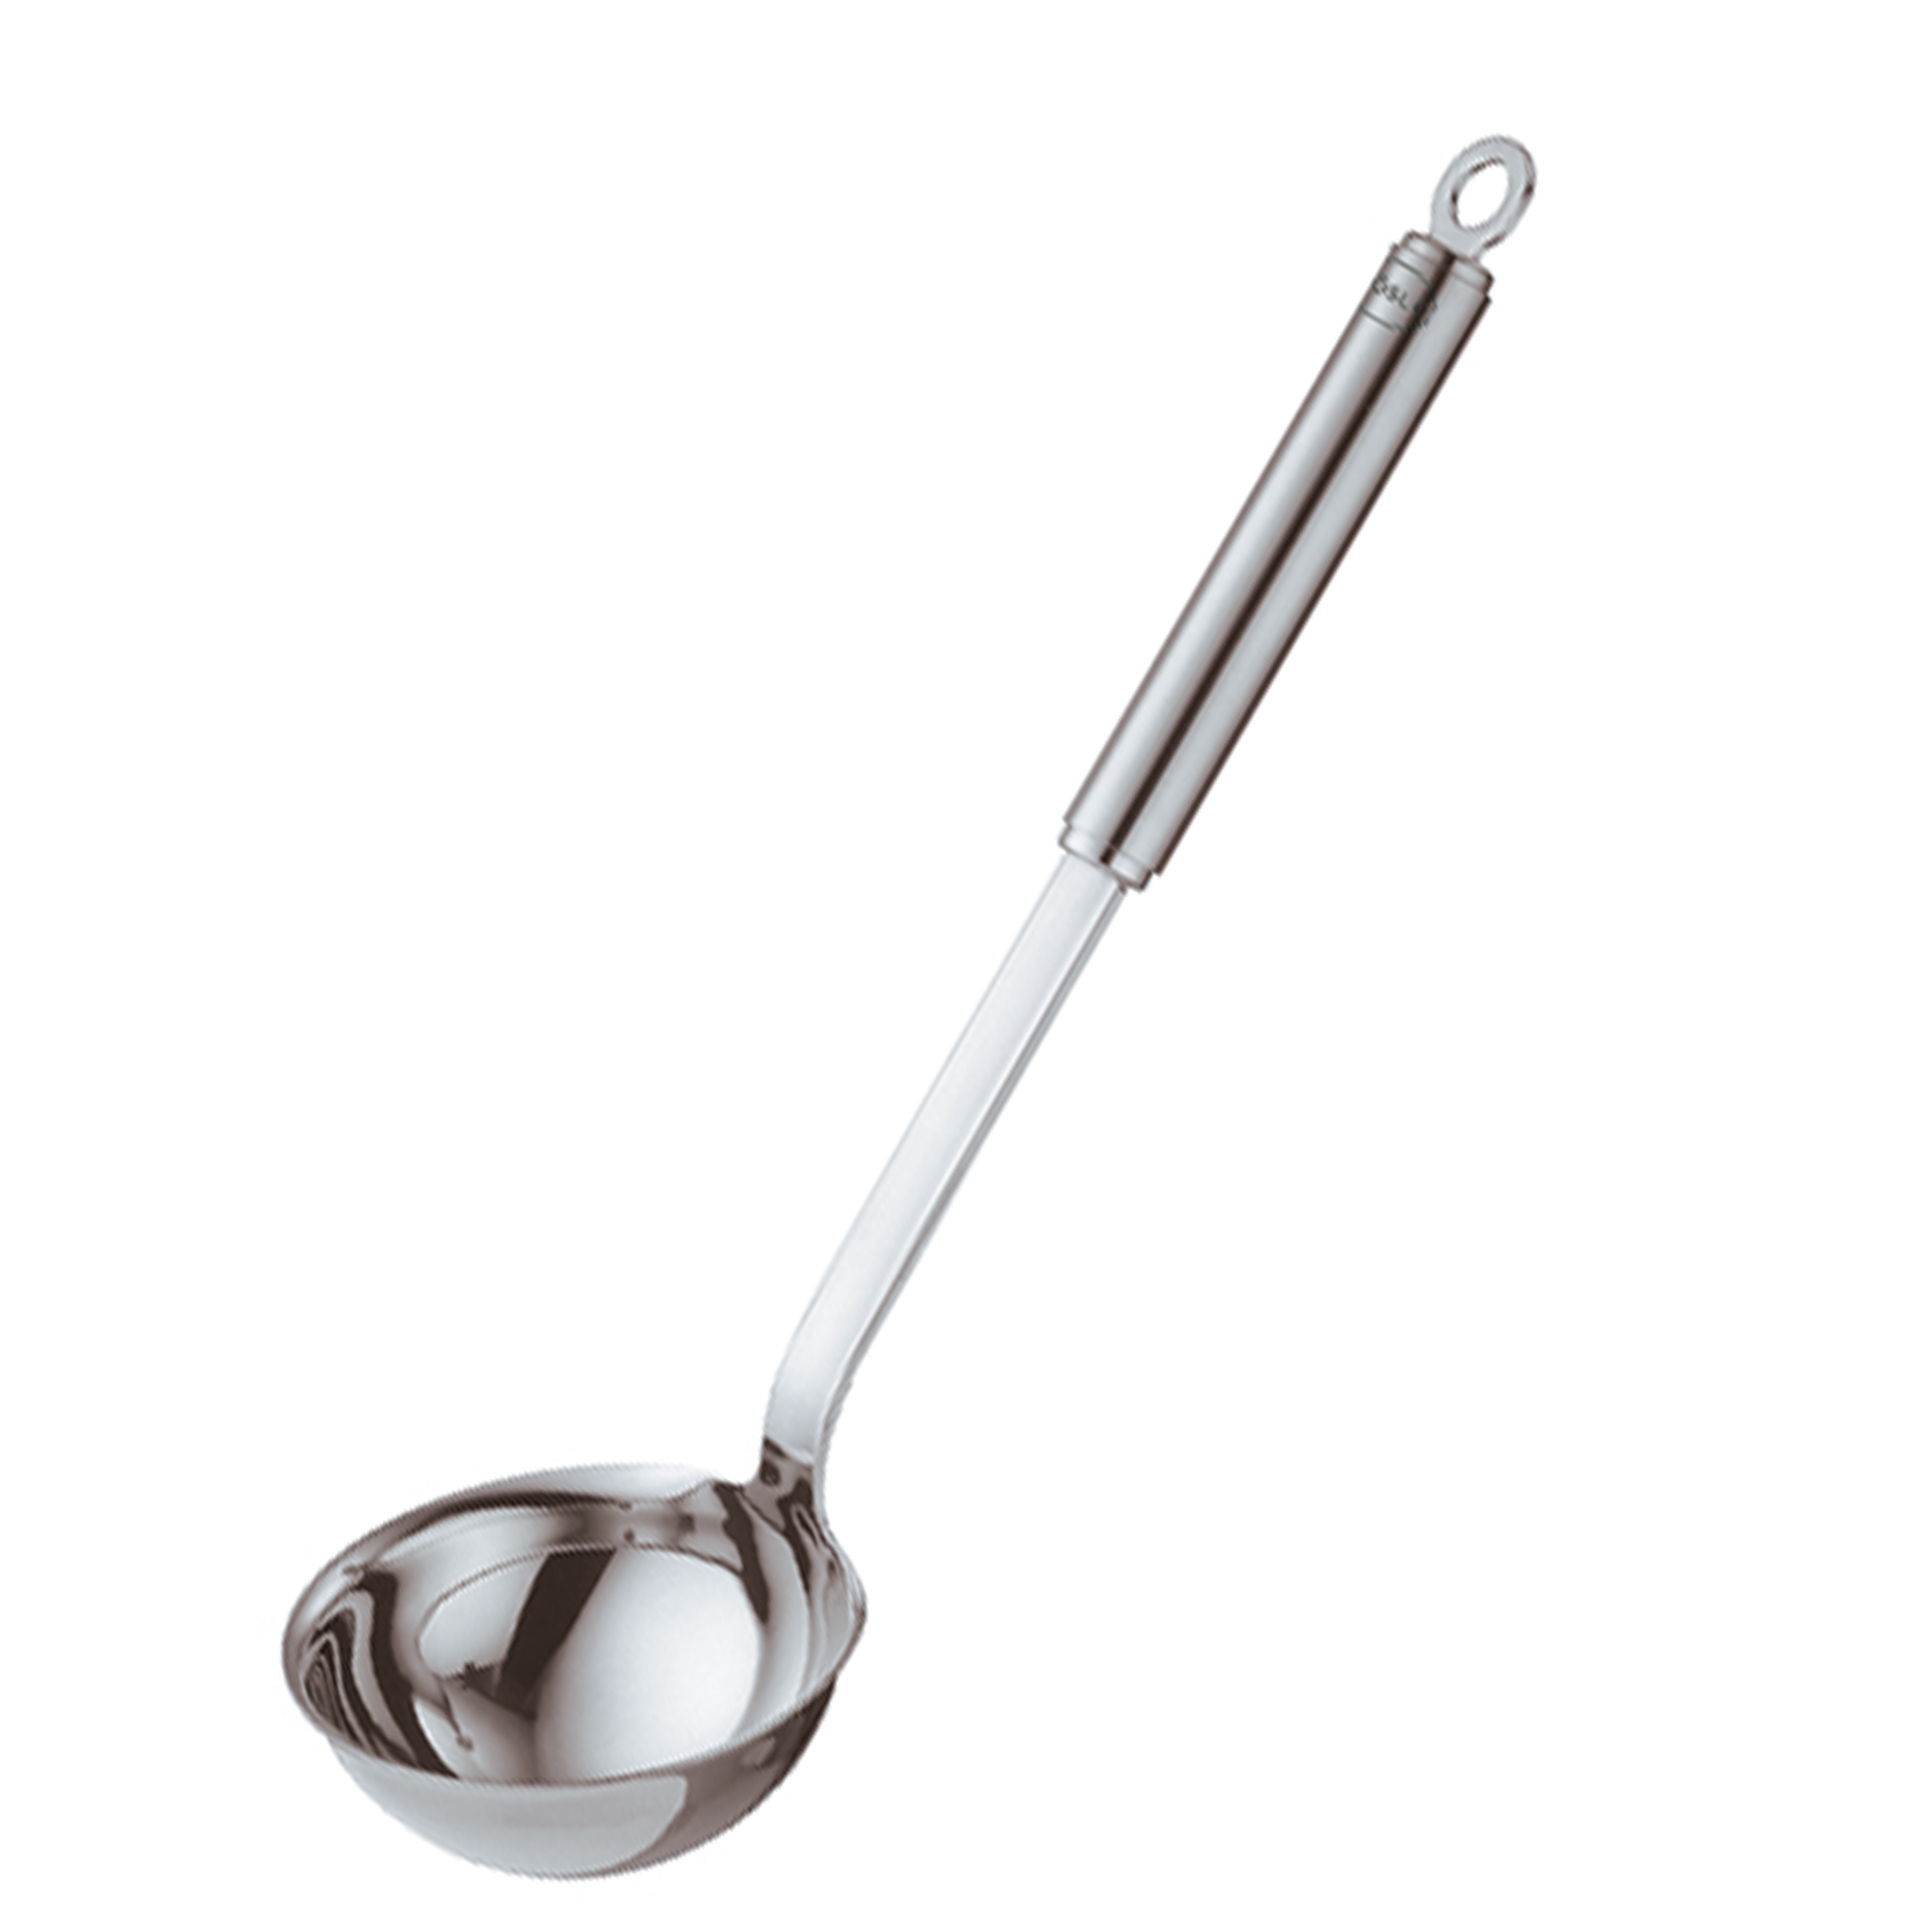 Rosle 9 cm Stainless Steel Hotel Ladle with Pouring Rim